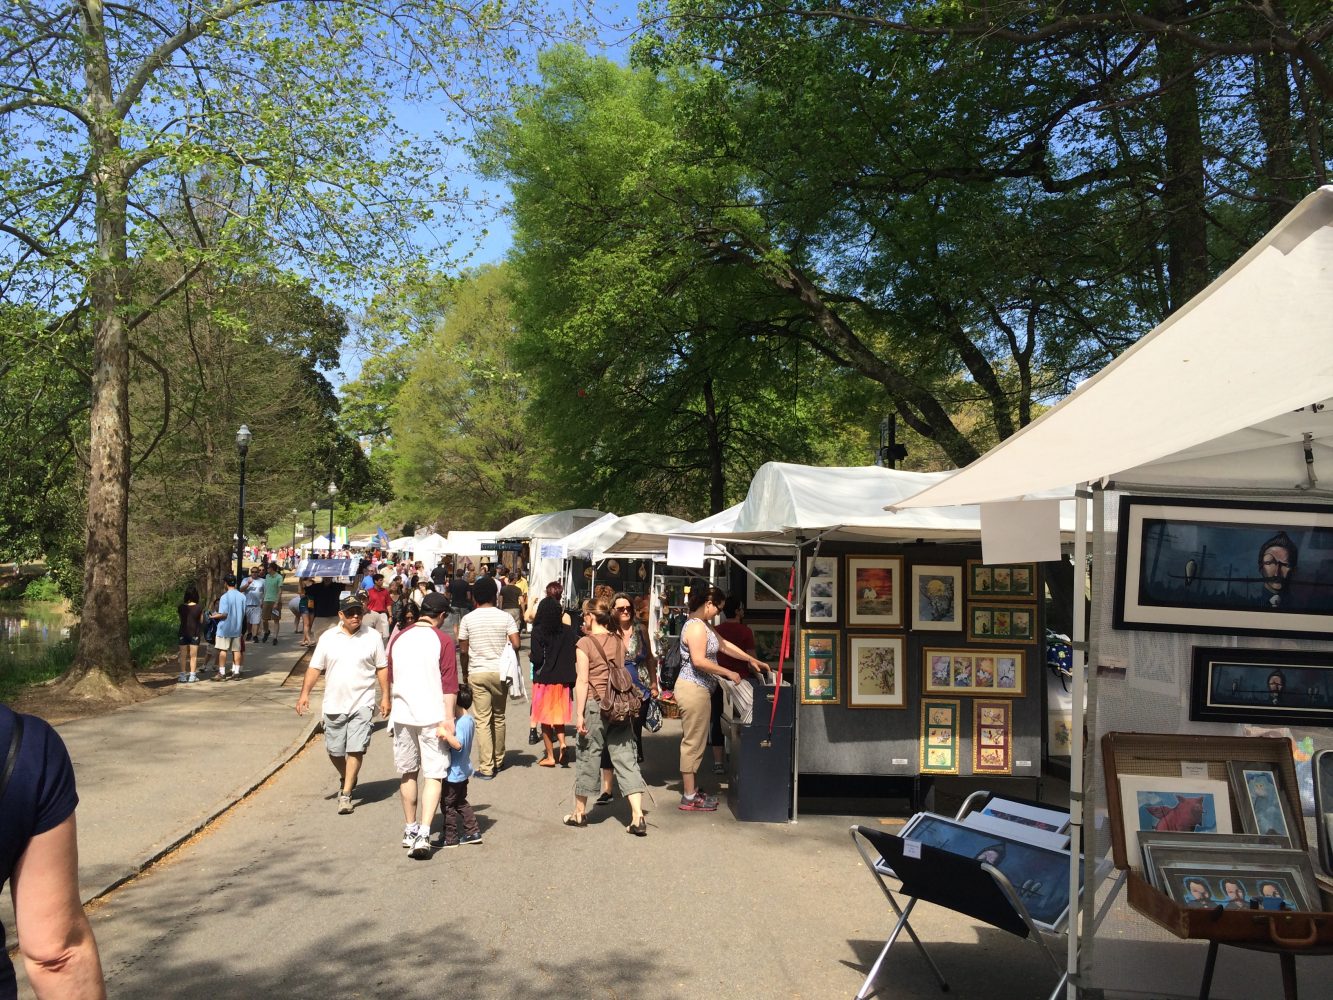 The sidewalks of Piedmont Park packed with artist booths.